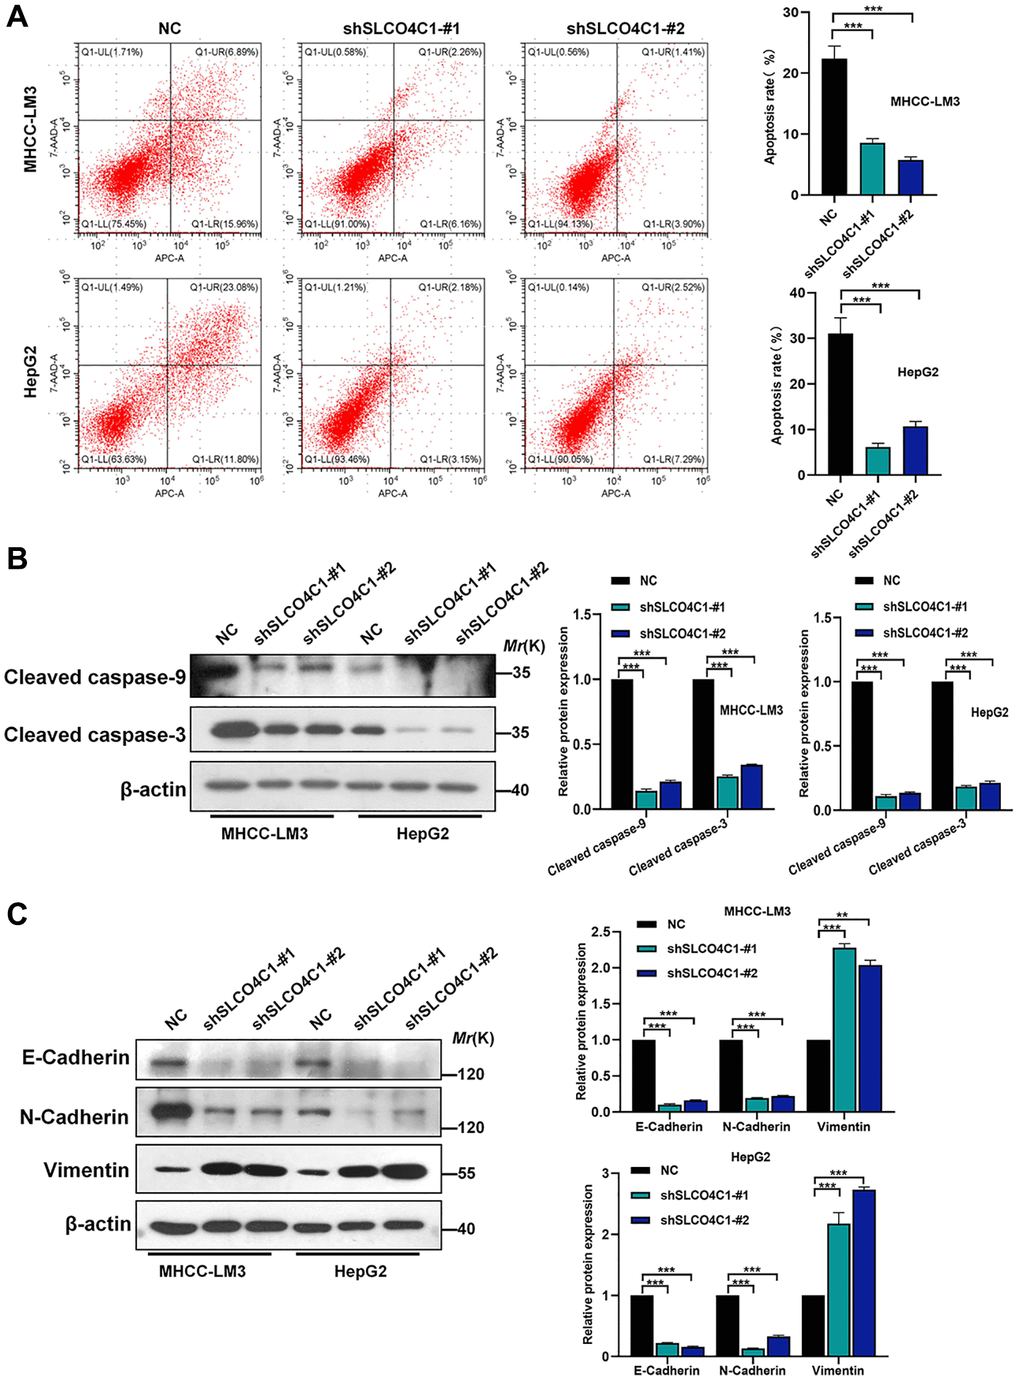 Effect of SLCO4C1 knockdown on apoptosis in HCC cells. (A) Flow cytometry analysis of apoptosis in HepG2 and MHCC-LM3 cells after SLCO4C1 knockdown. (B) Western blotting for the expression of apoptosis-related protein cleavage caspase-3/9 in SLCO4C1 knockdown HepG2 and MHCC-LM3 cells. (C) Expression of EMT markers in SLCO4C1 knockdown HepG2 and MHCC-LM3 cells by Western blotting. *P **P ***P 